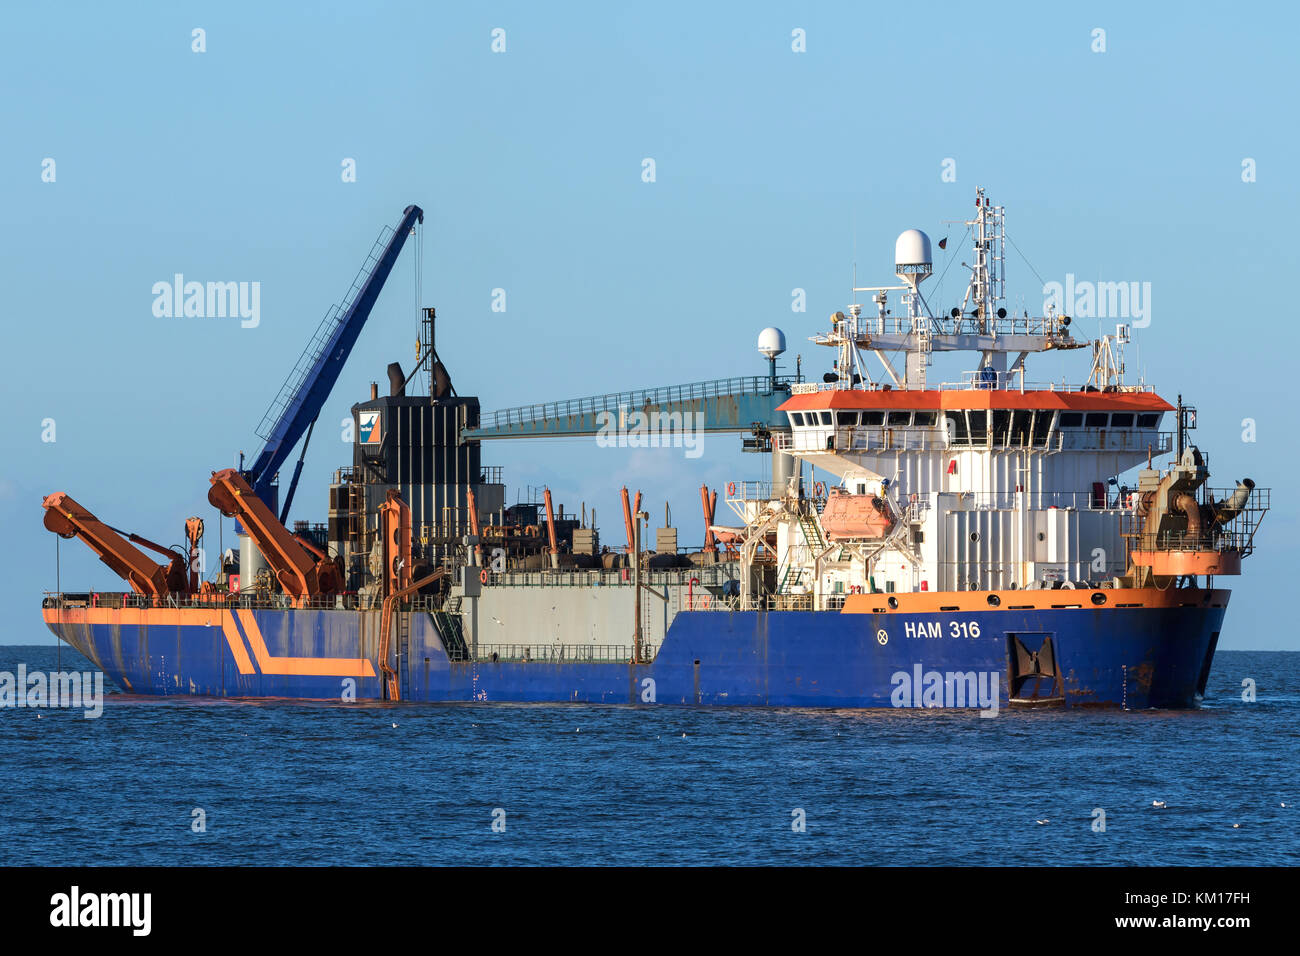 trailing suction hopper dredger HAM 316 operated by Van Oord, a Dutch contracting company with one of the world's largest dredging fleets. Stock Photo